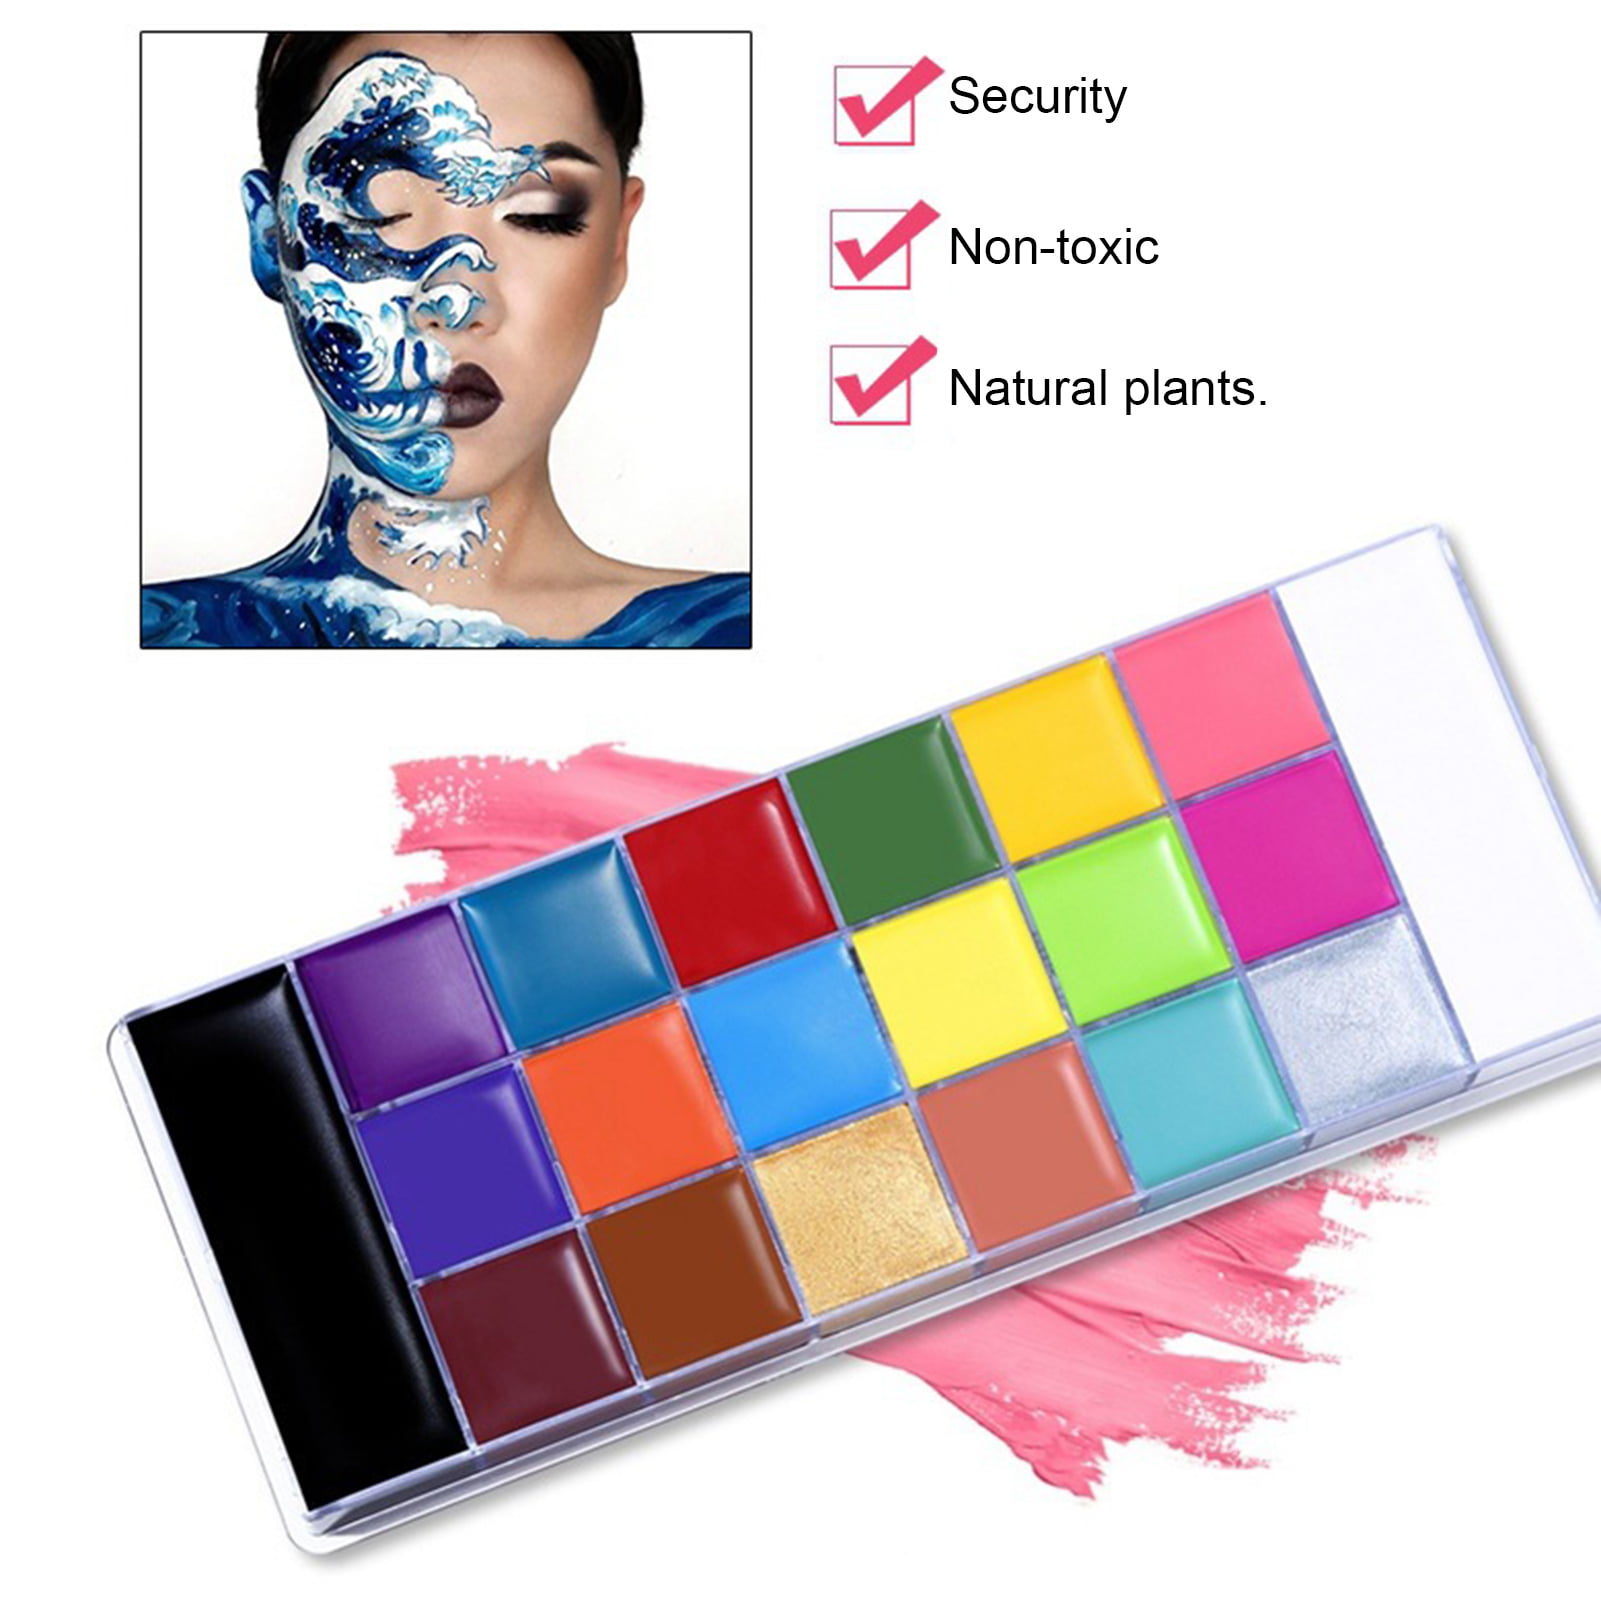 20 Colors Face Painting - Face Body Paint Palette Kit For  Adult/professional Tattoo Painting Art, Halloween Party